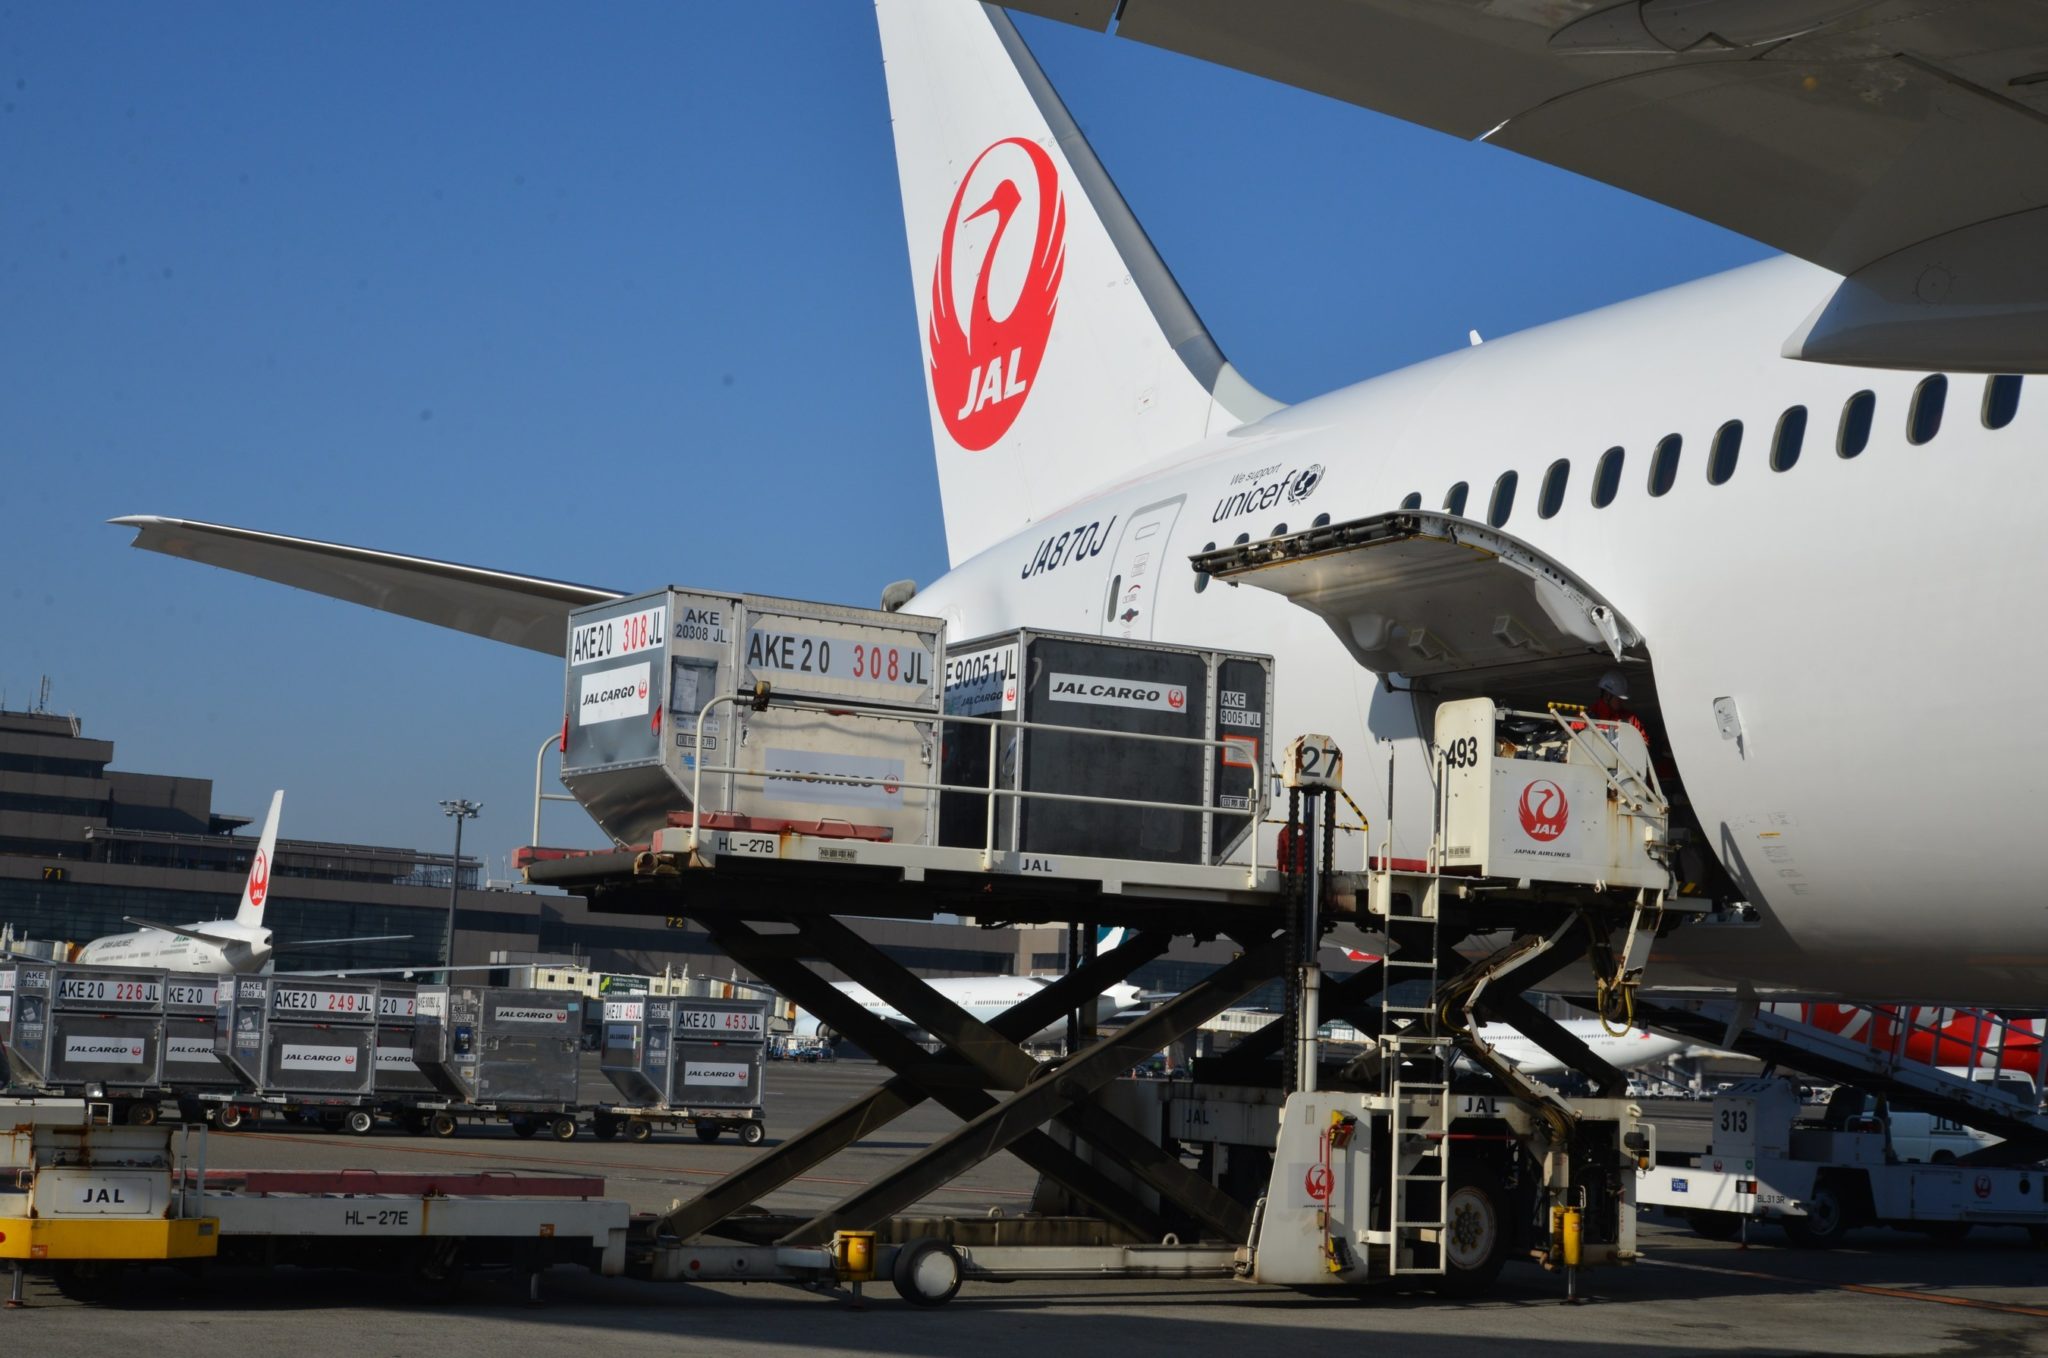 JAL to replace legacy systems with IBS’s iCargo Terminal Operations